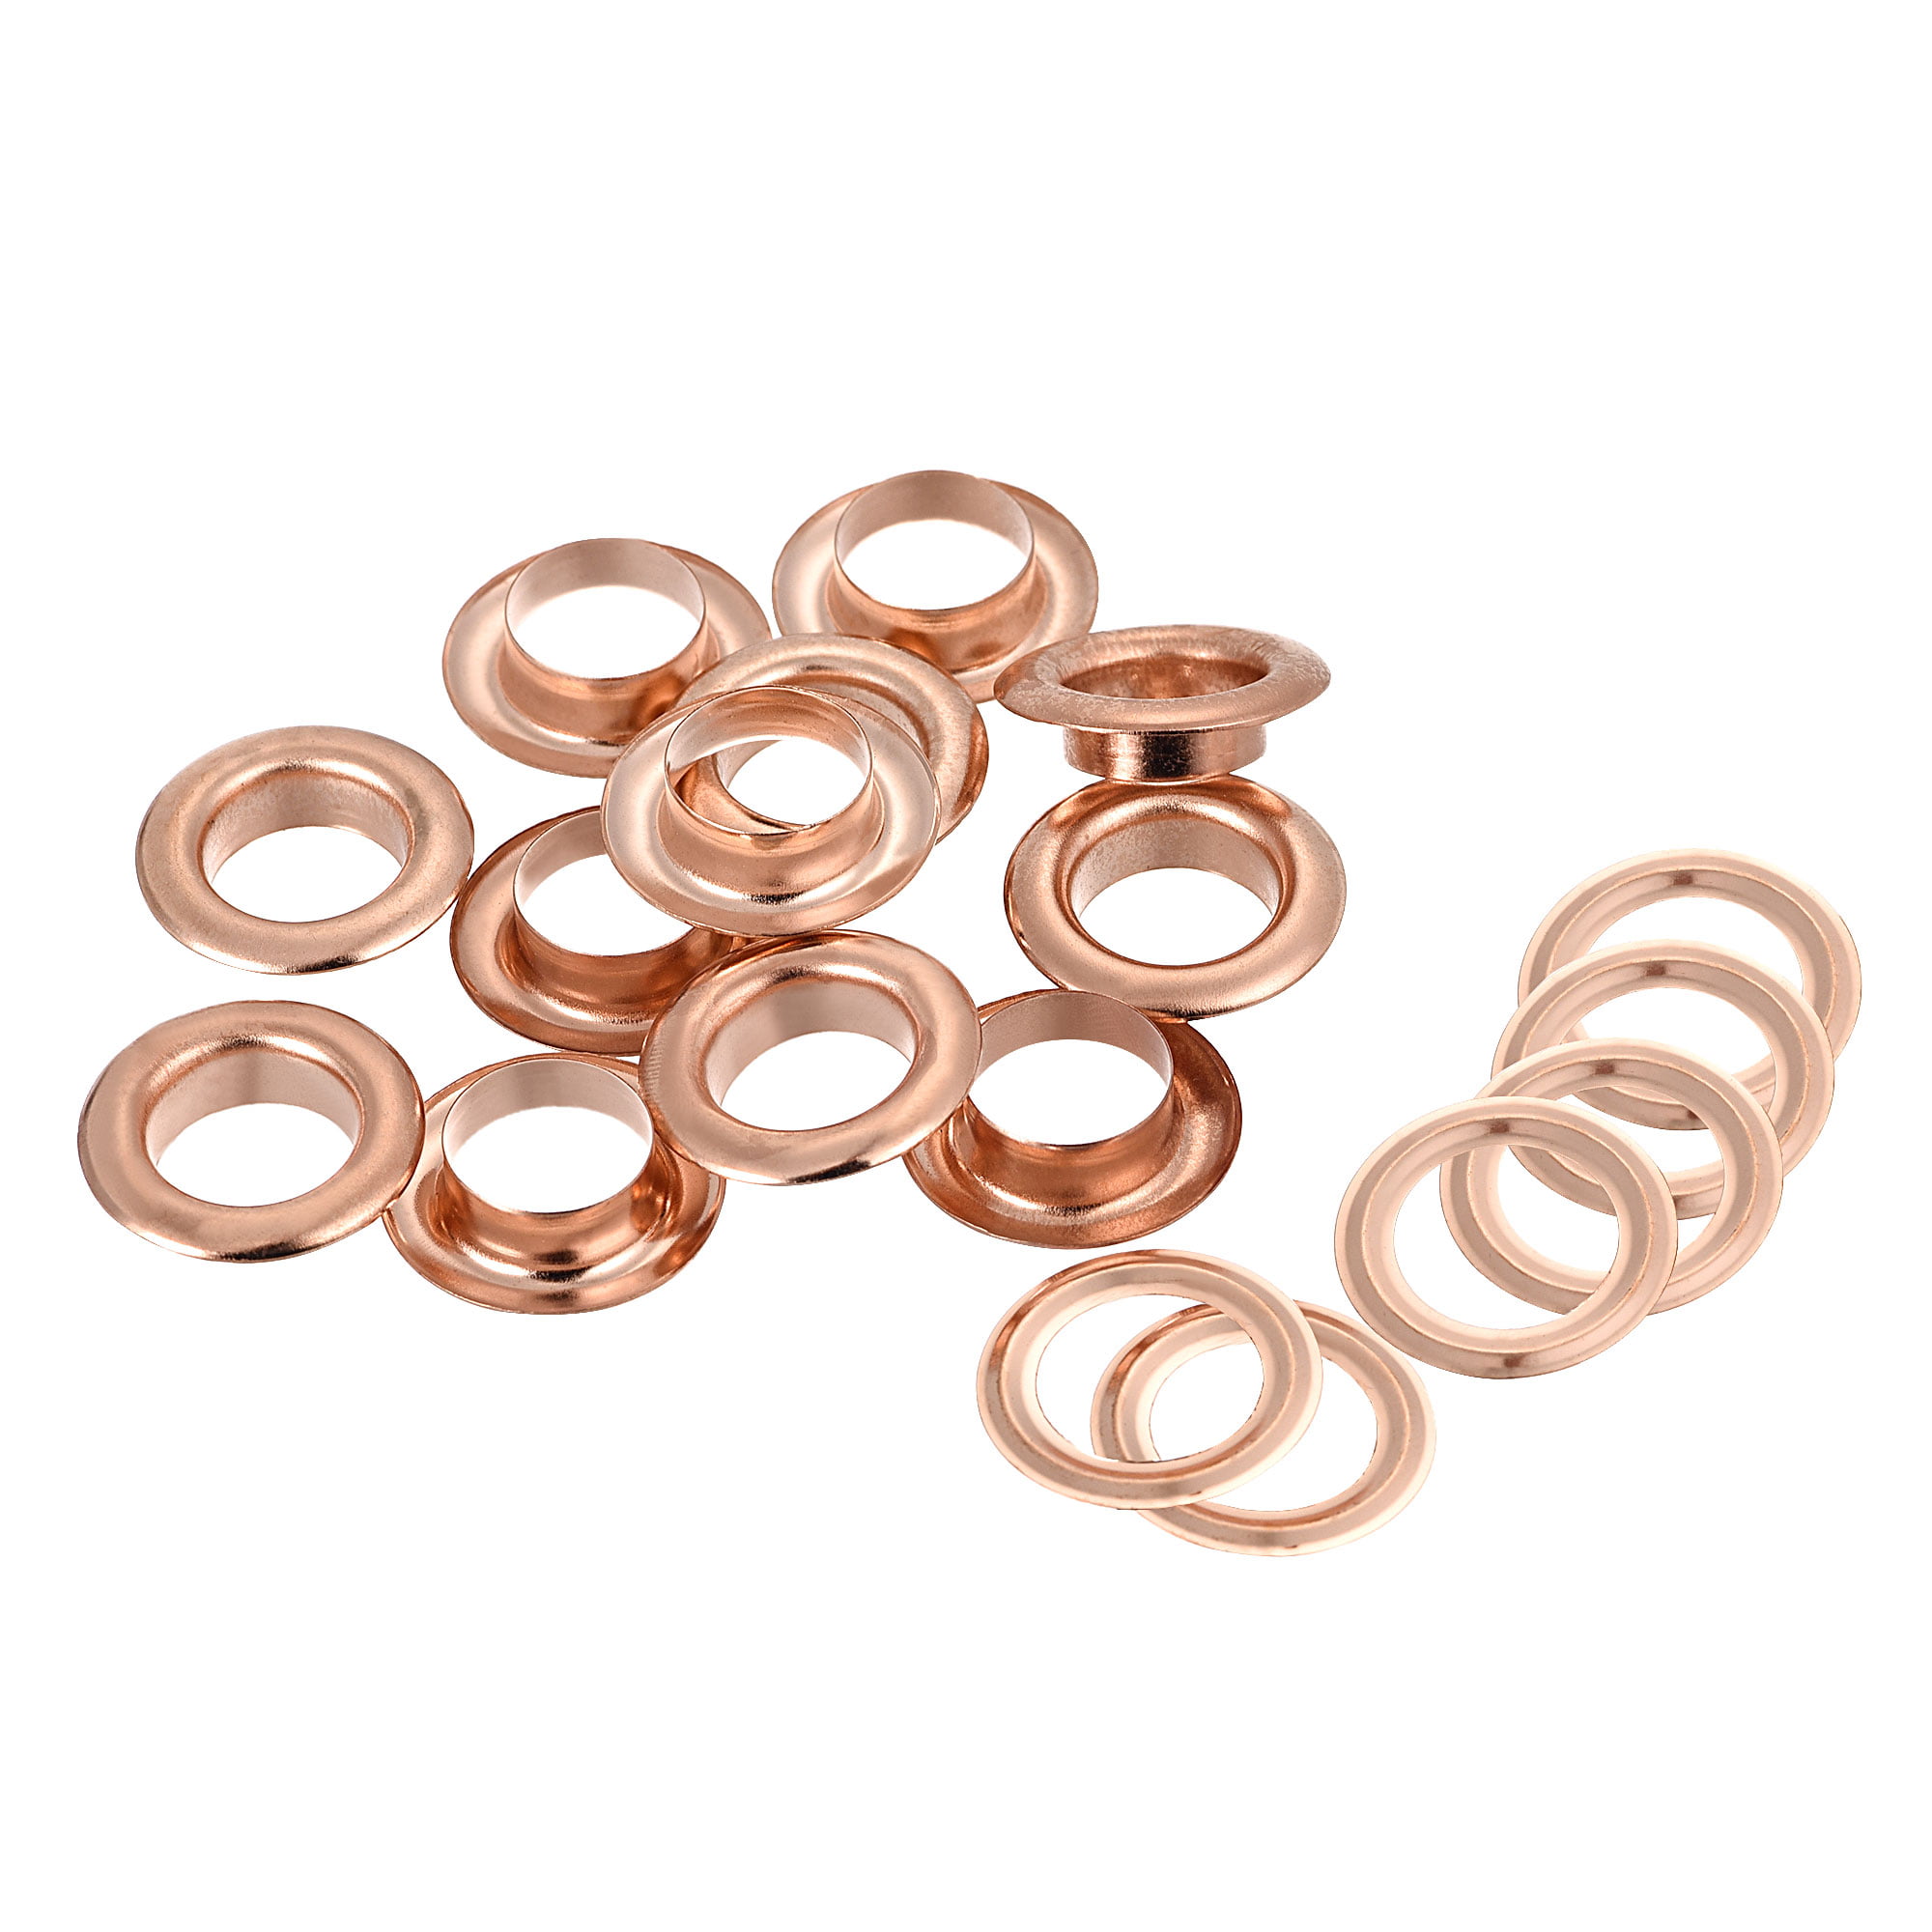 100 pcs Size 3 Gold Color Eyelets. Outer dim : 10 mm. Inner dim: 5.5mm 